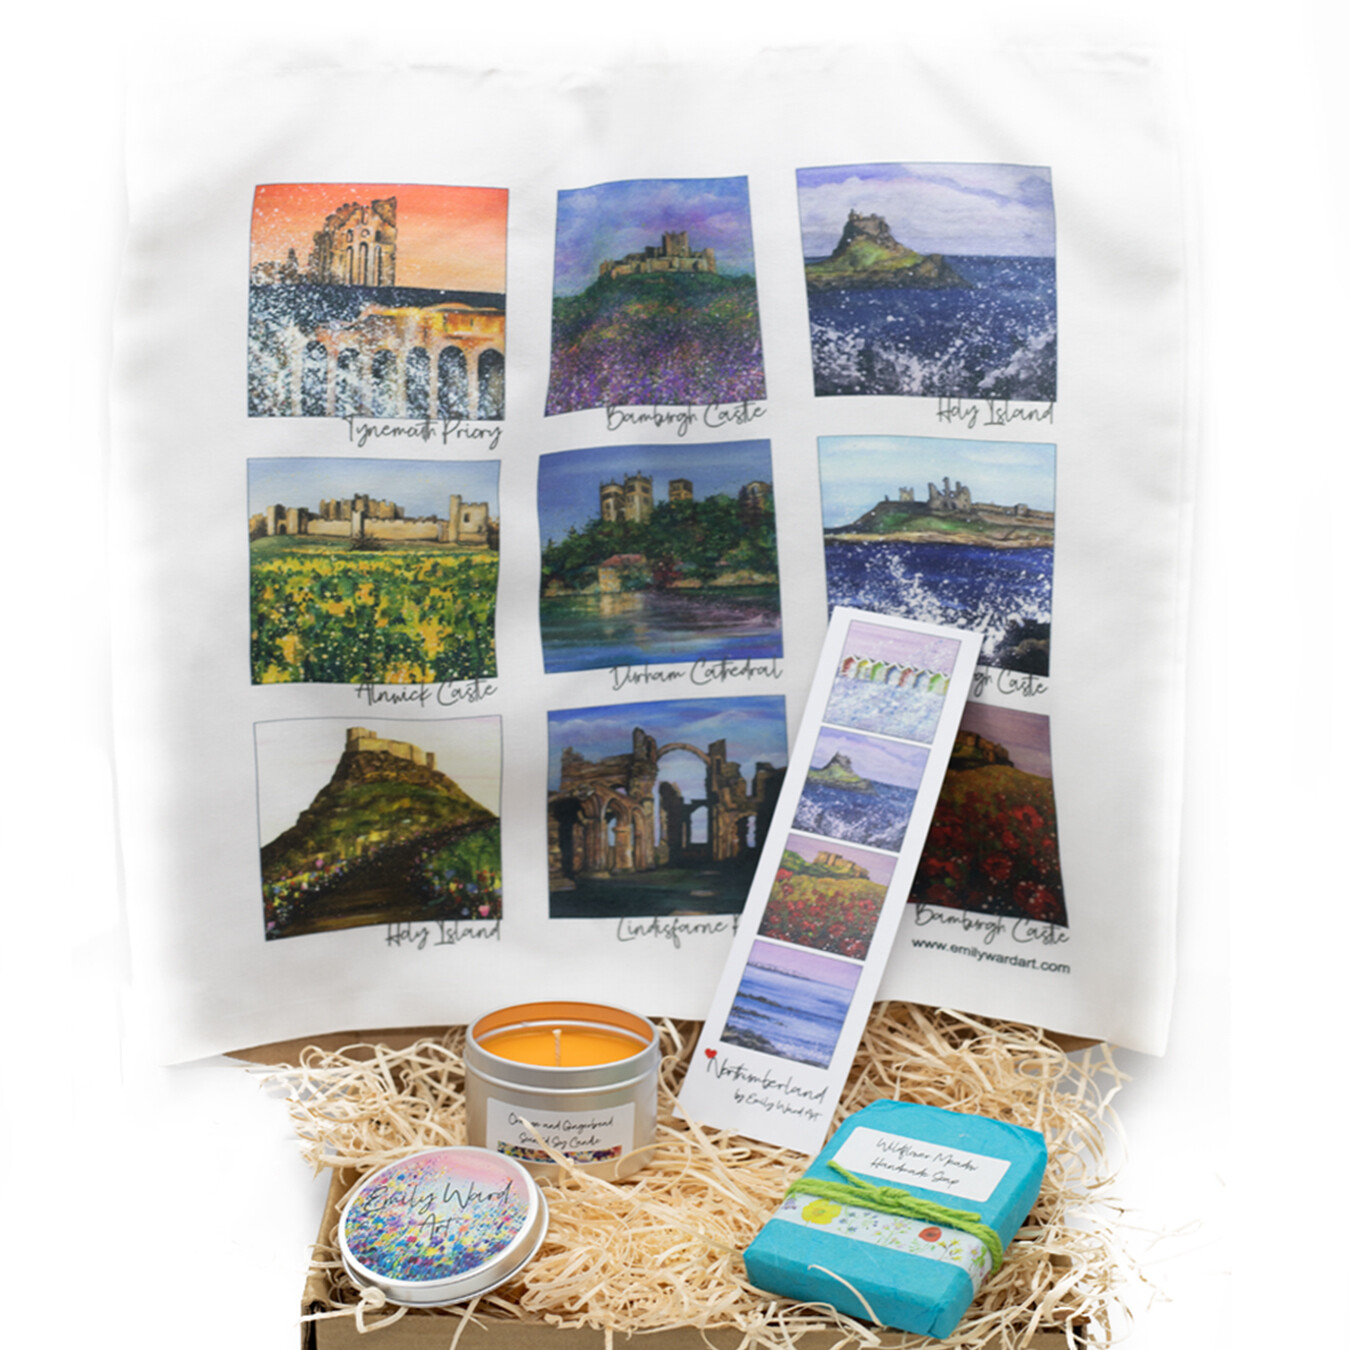 North East Castles in a Gift box - includes Bag, Bookmark, Soap and Candle